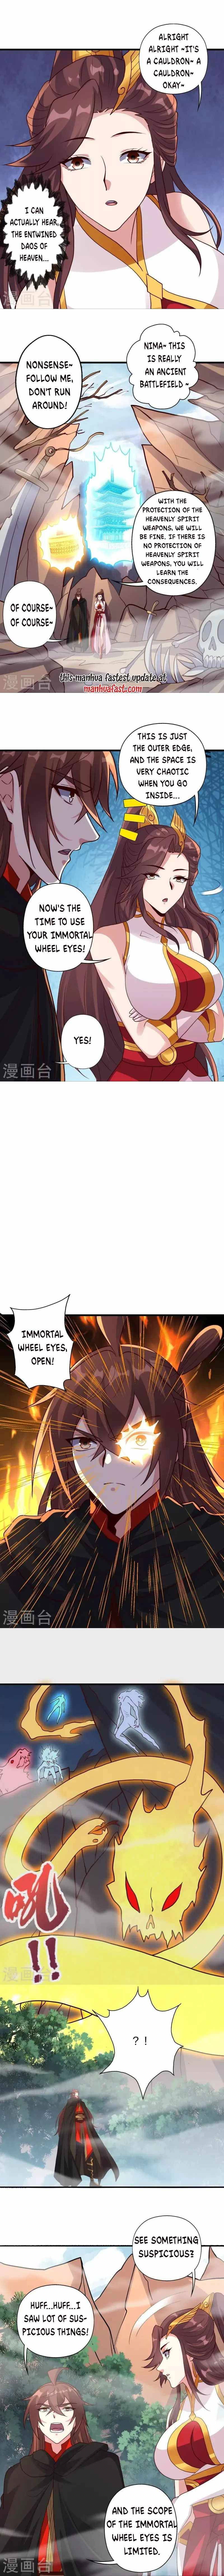 Banished Disciple's Counterattack Chapter 355 page 9